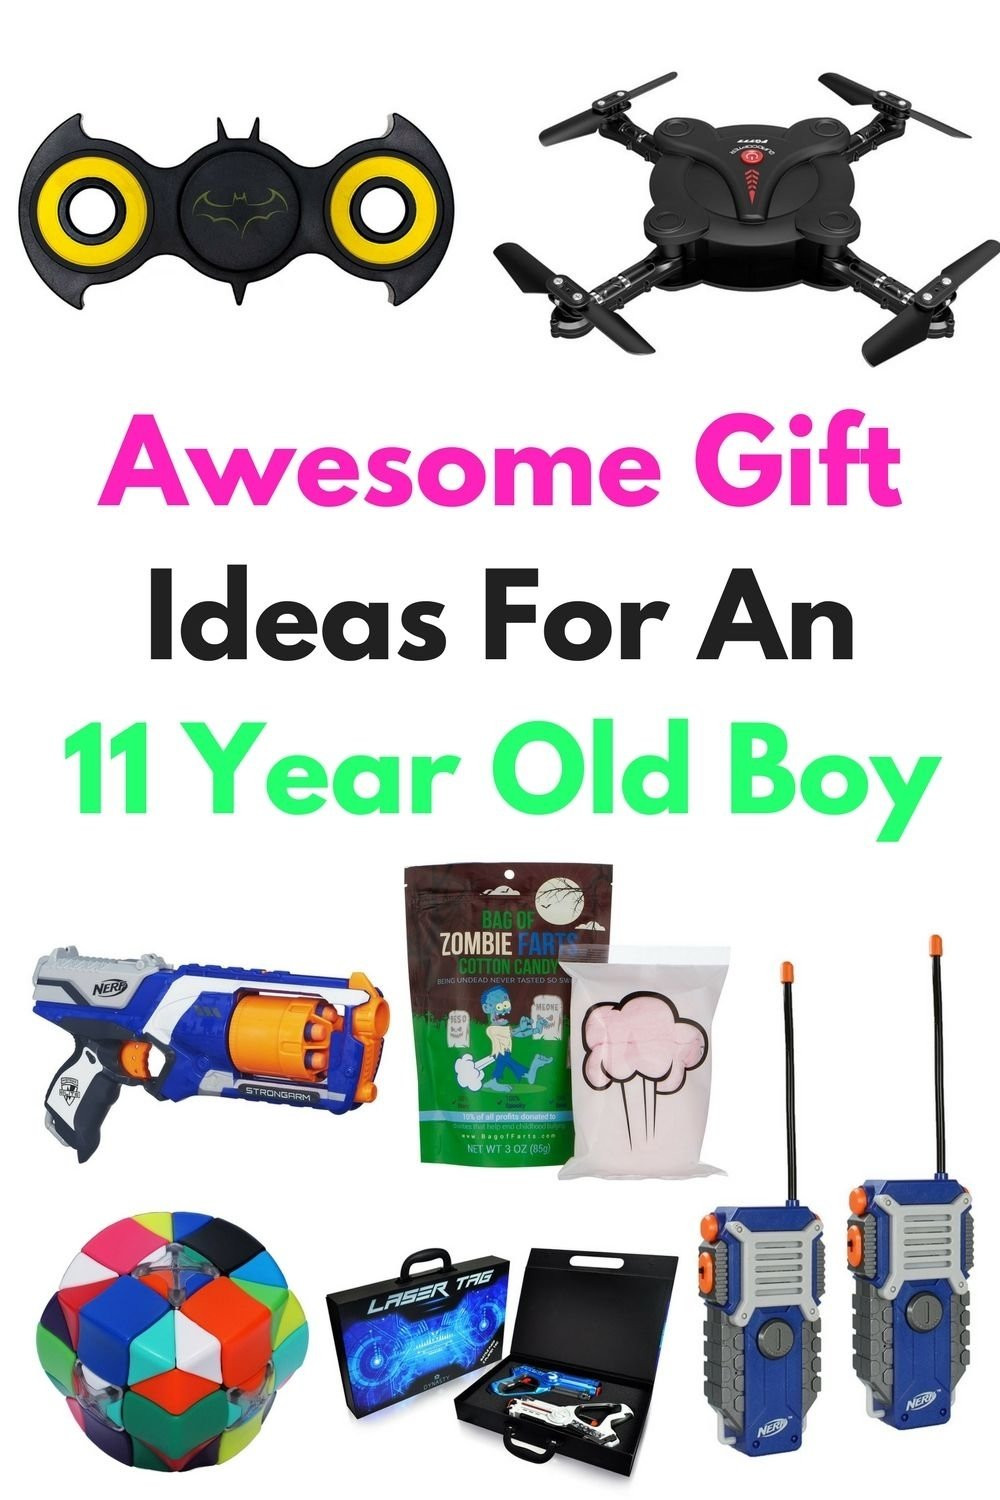 Gift Ideas For Boys 10
 10 Attractive 12 Year Old Boy Christmas Gift Ideas 2020